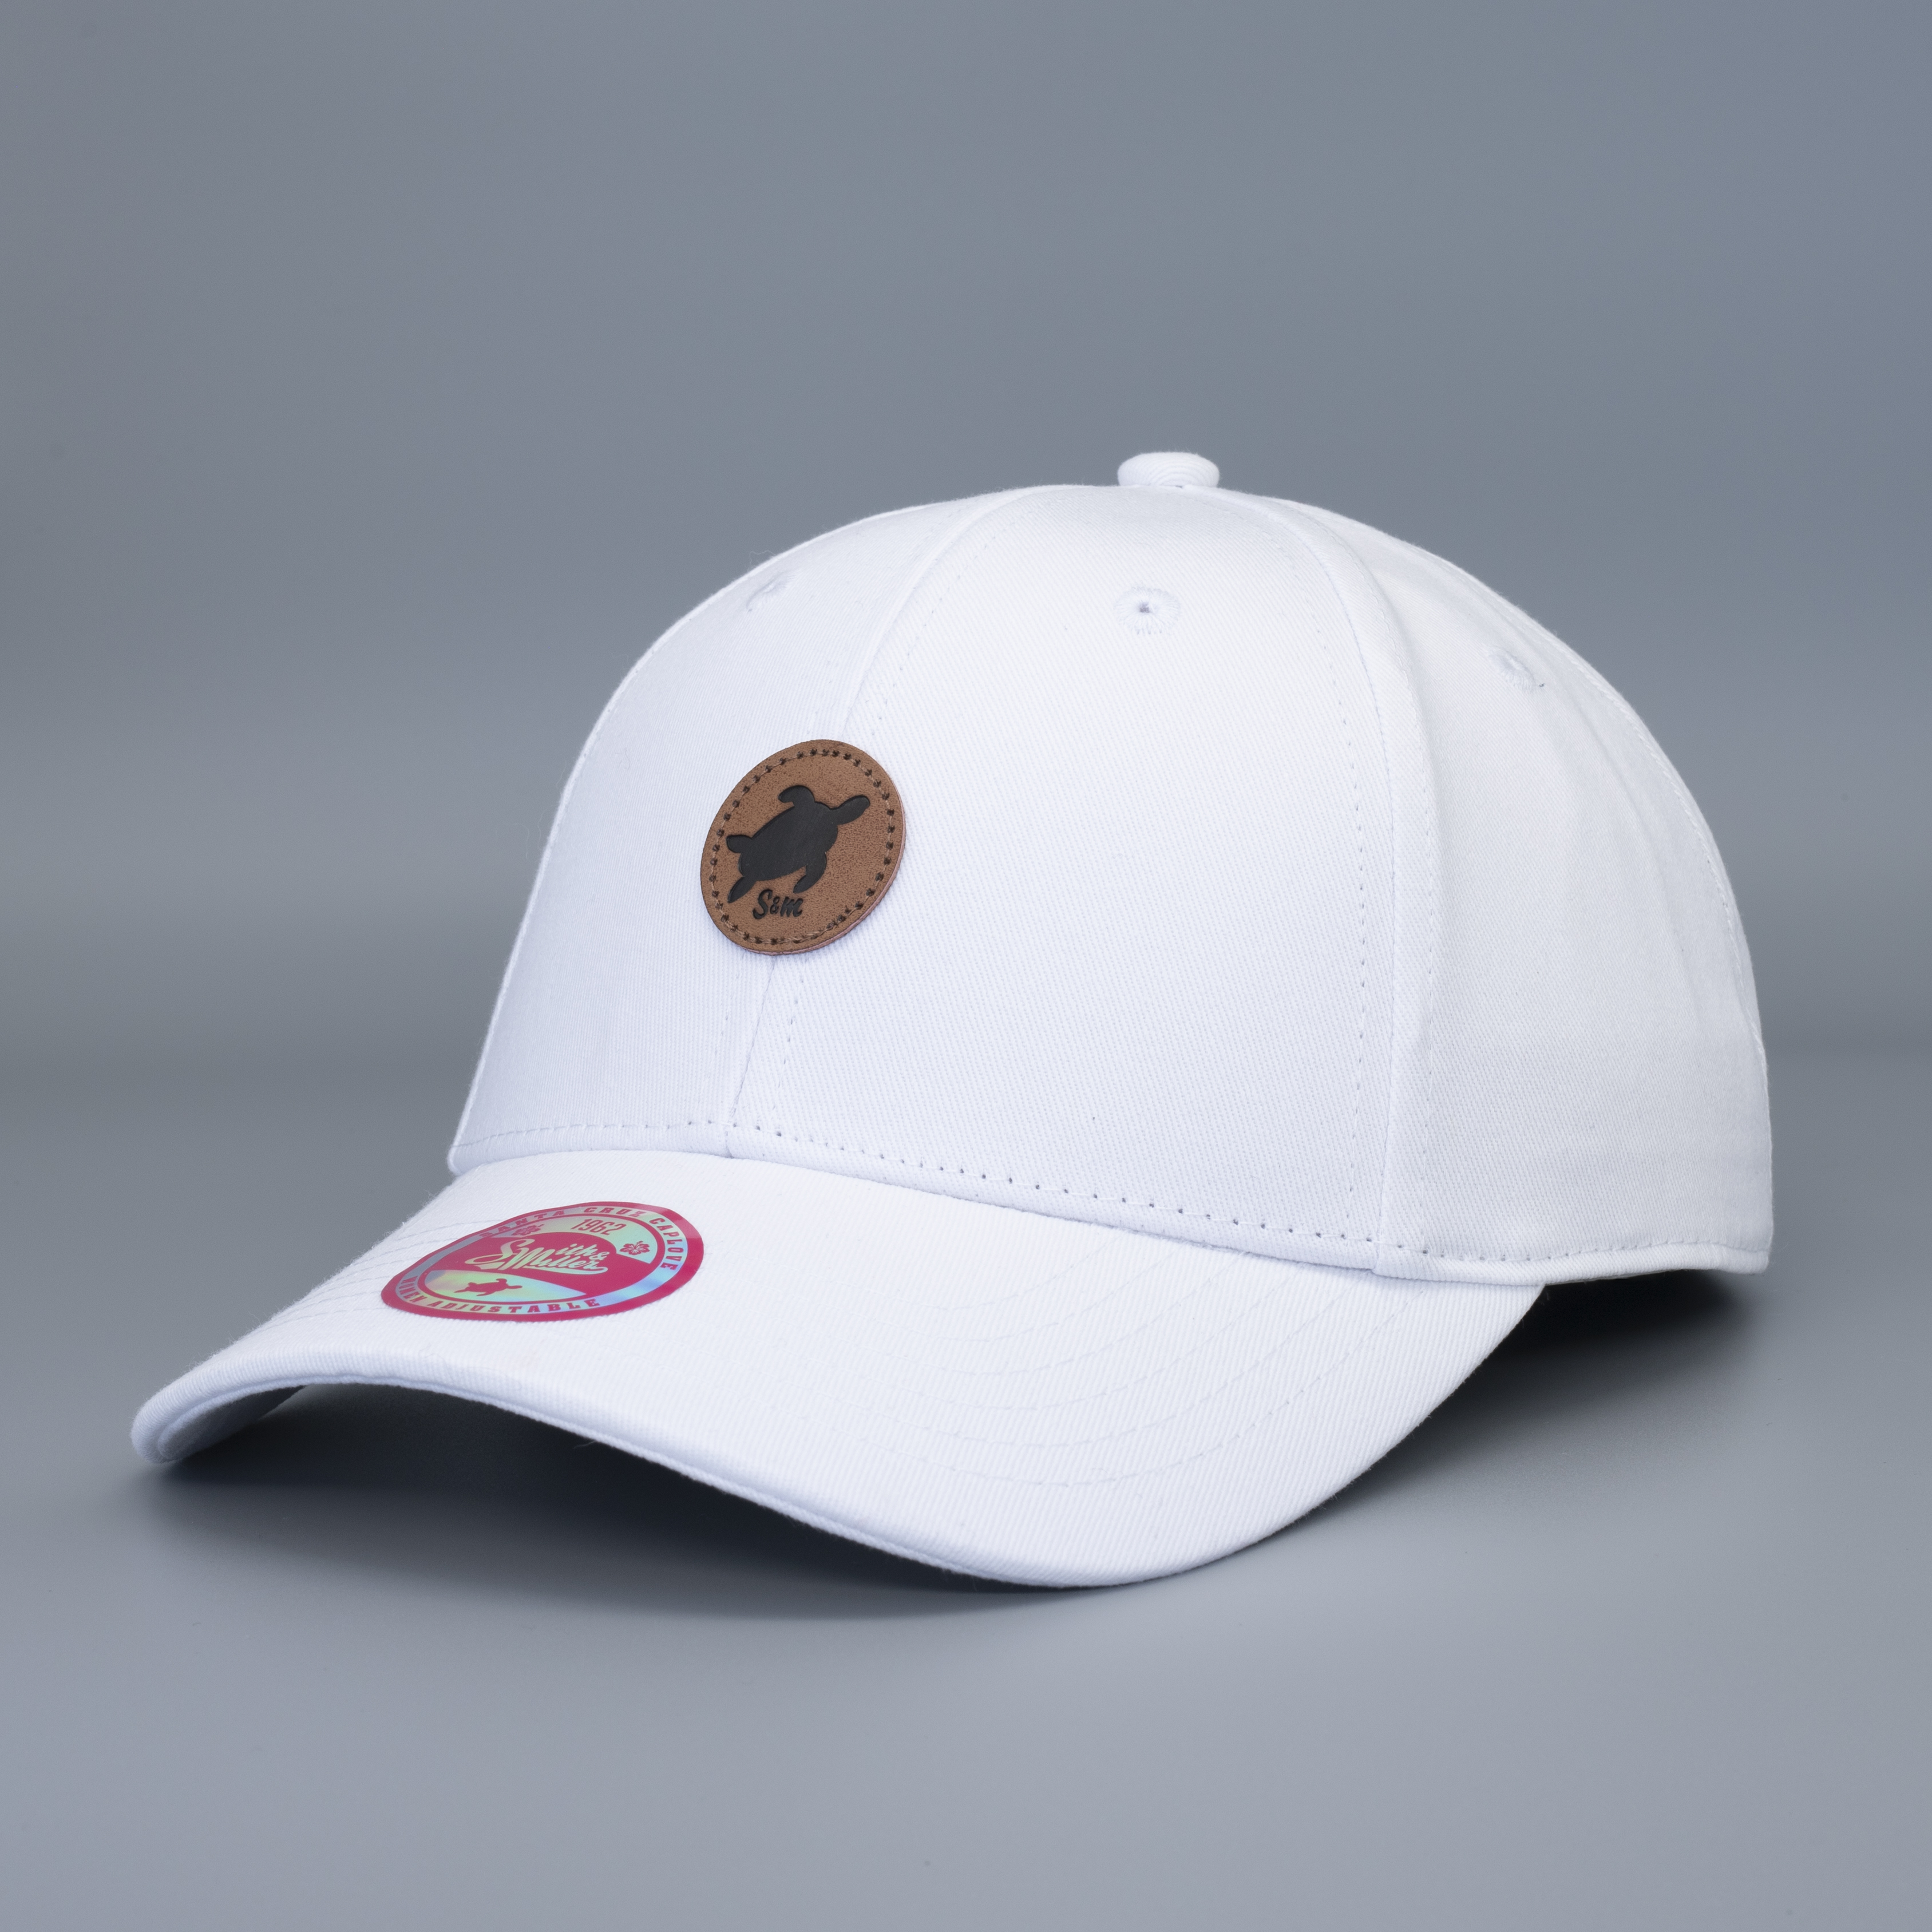 Smith & Miller Bend Women Curved Cap, white